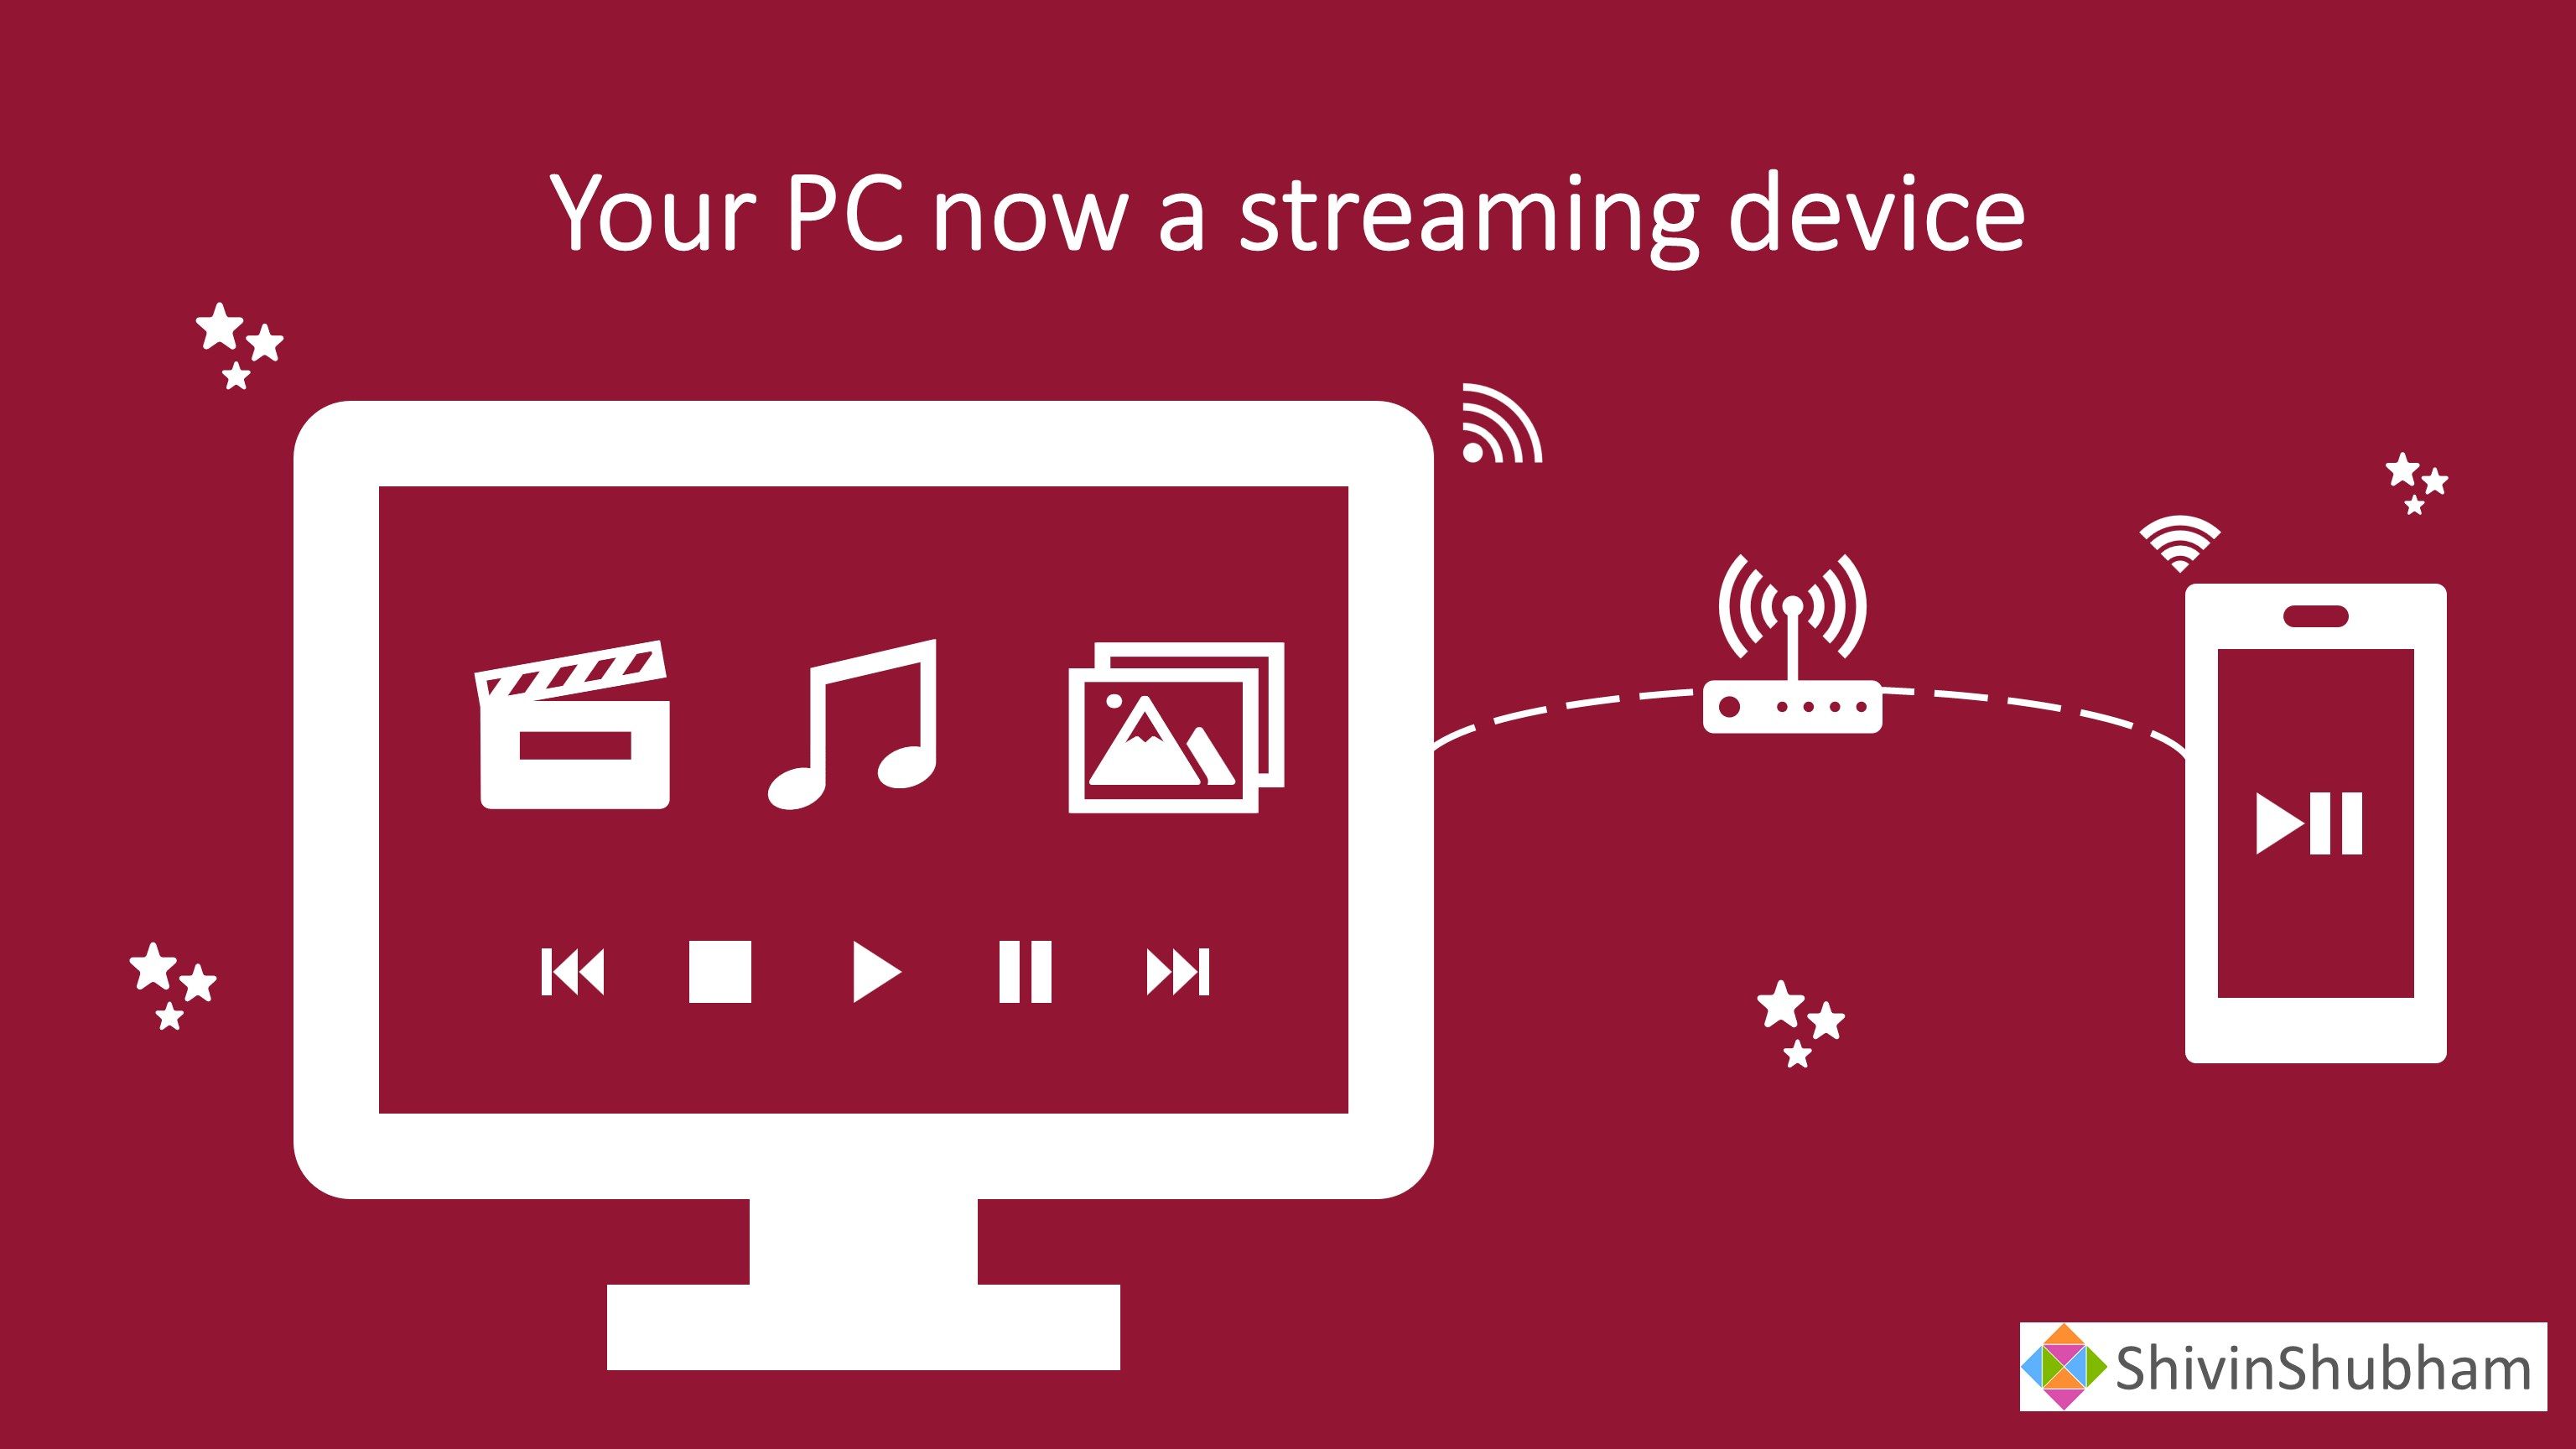 Make your PC a streaming device